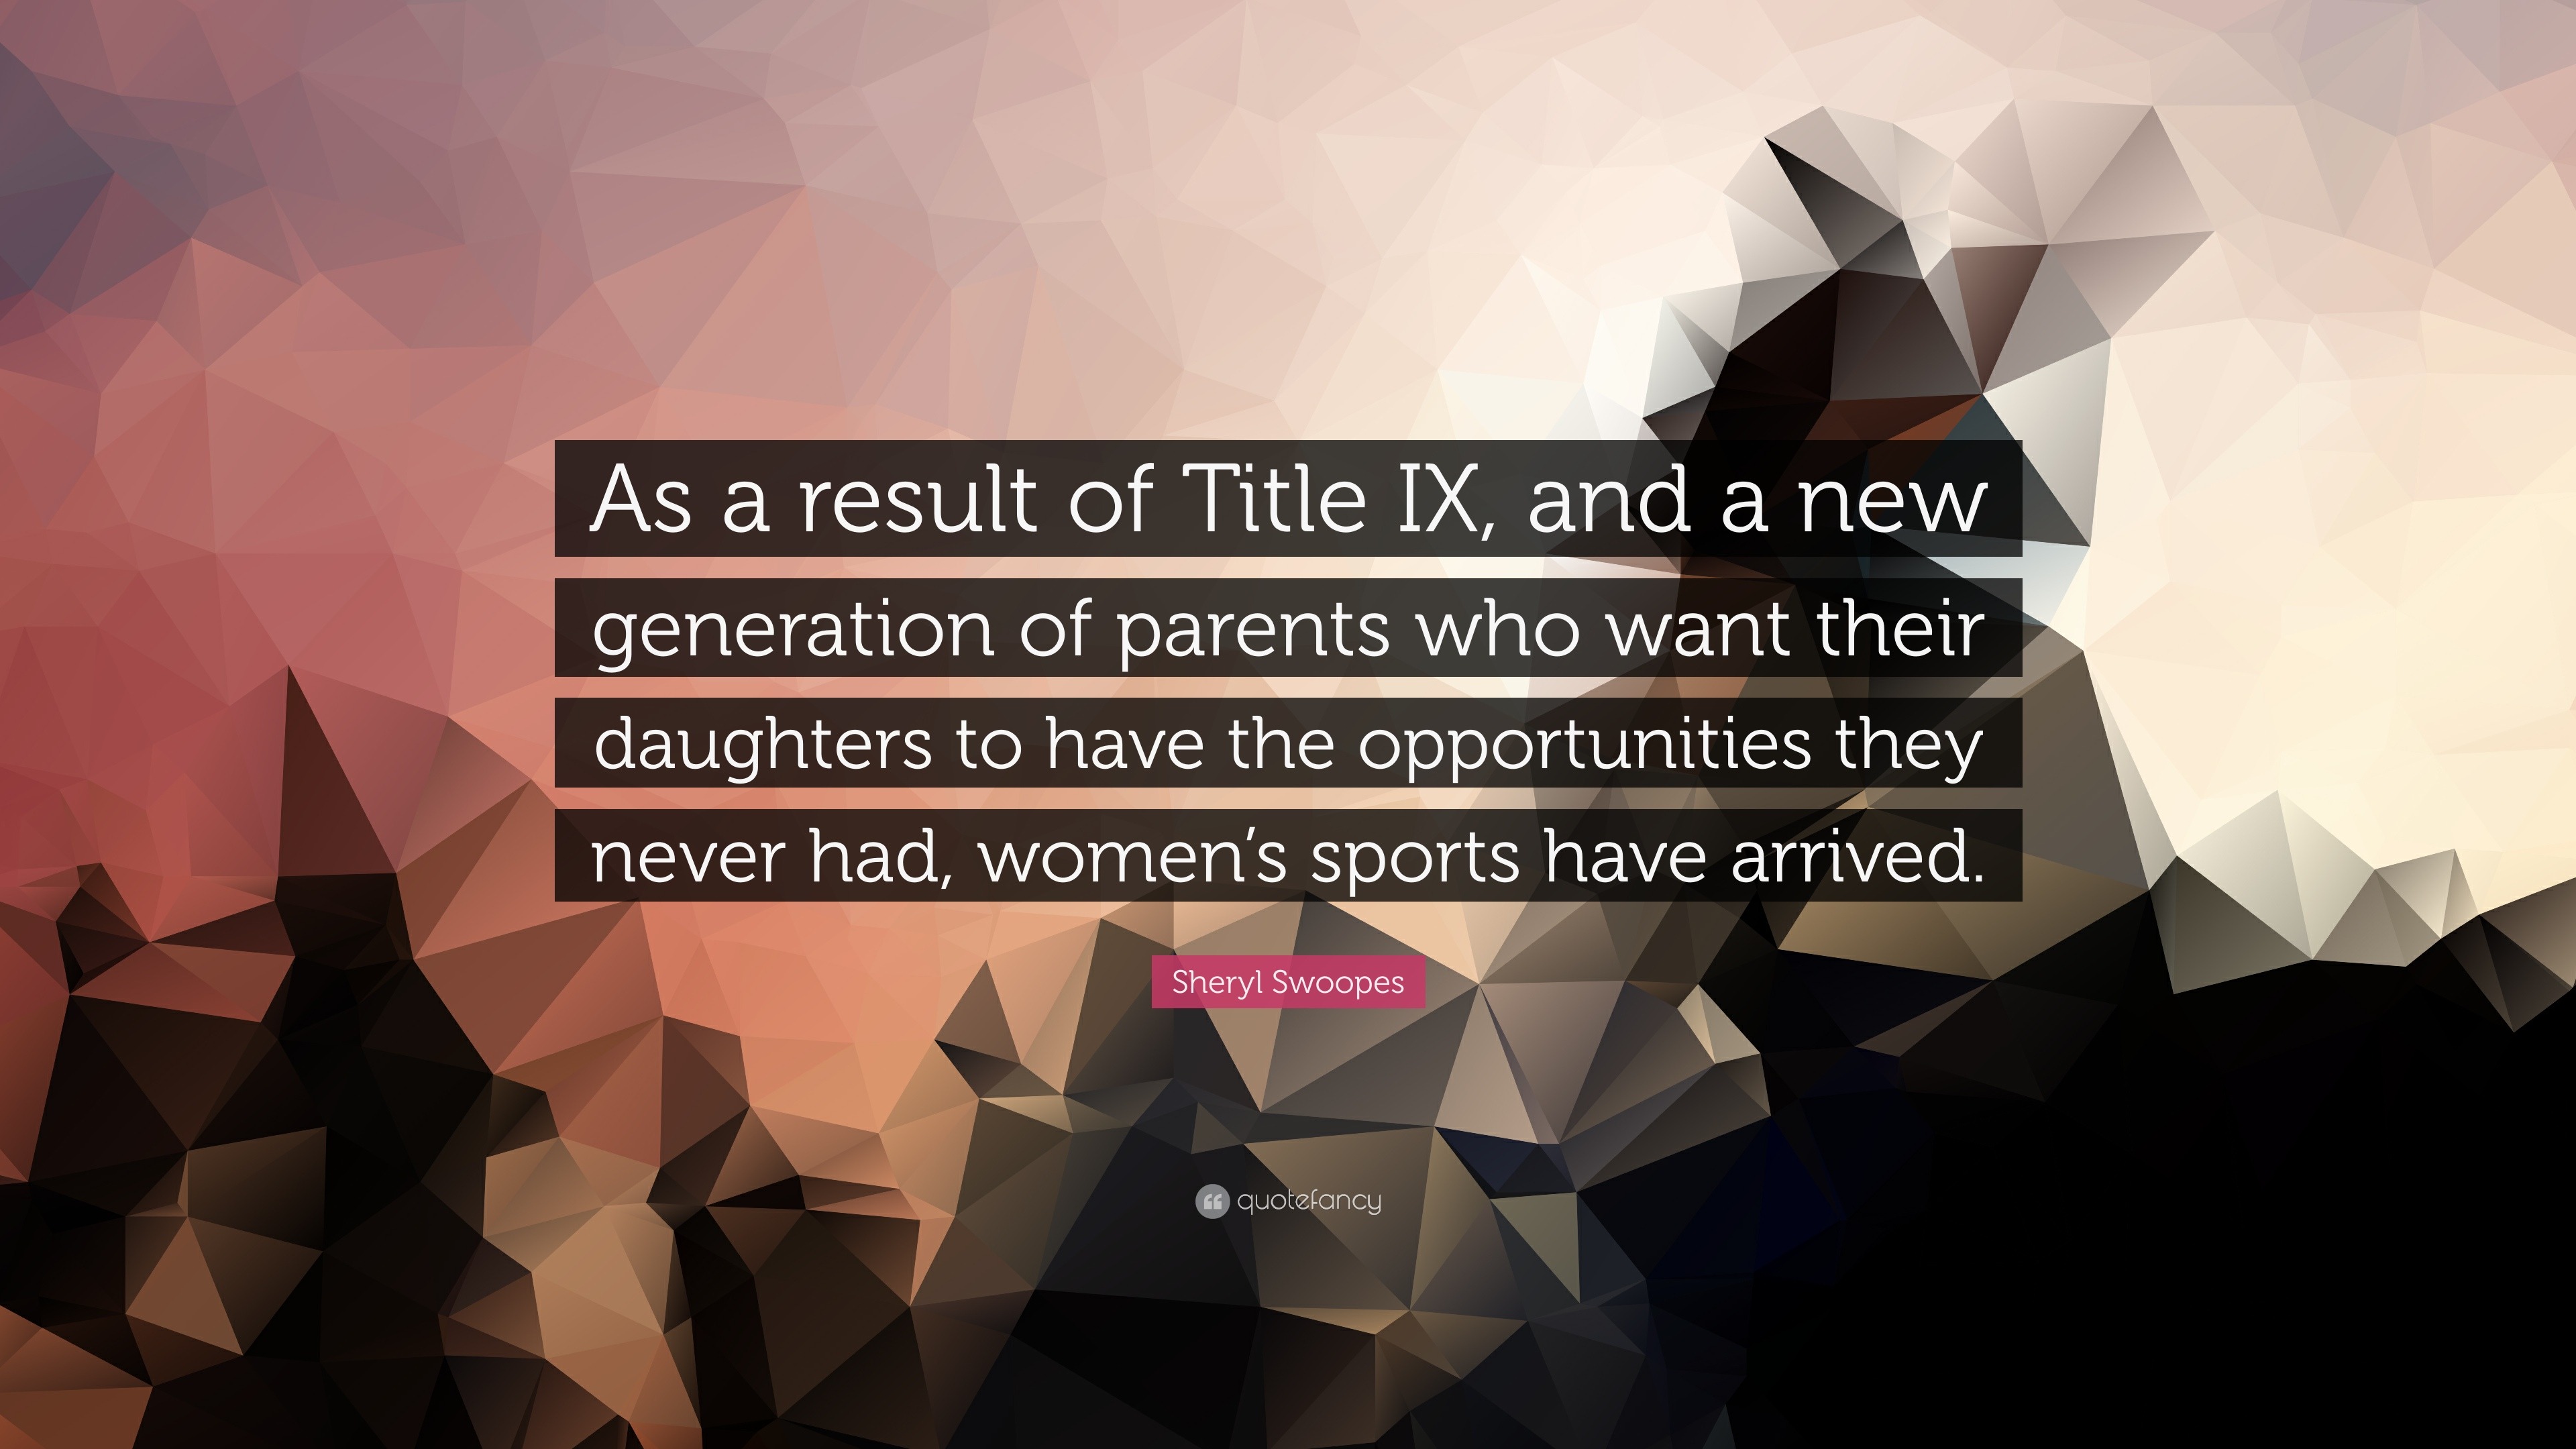 Sheryl Swoopes: Building on the vision of Title IX